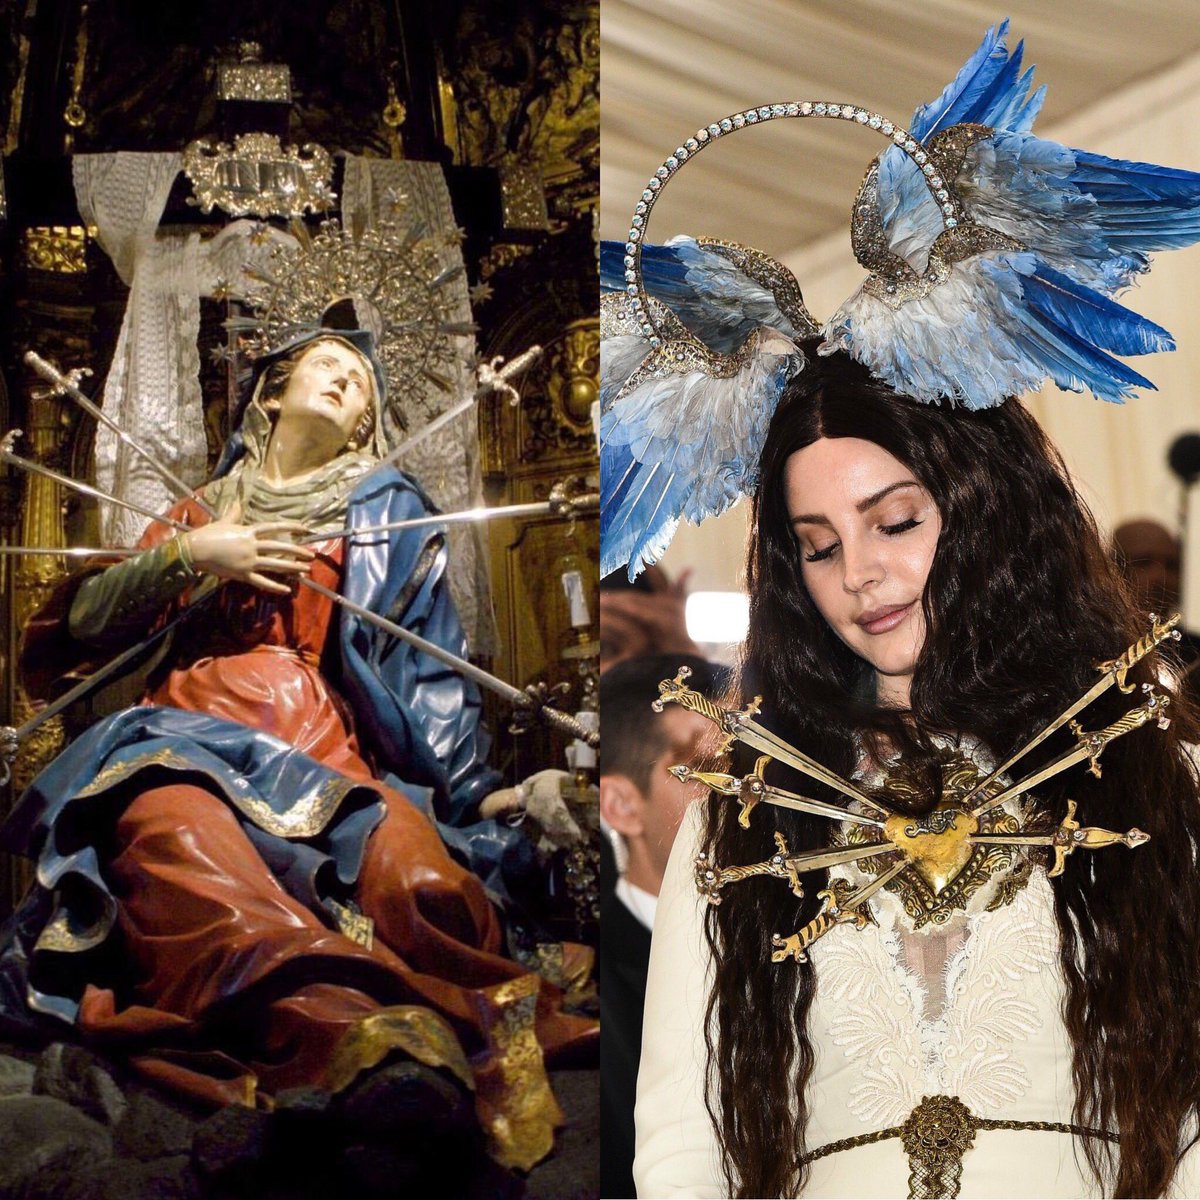 There will (probably) never be a "Protestant Imagination" themed costume party, at the Met or anywhere else.I hope I'm wrong about that.